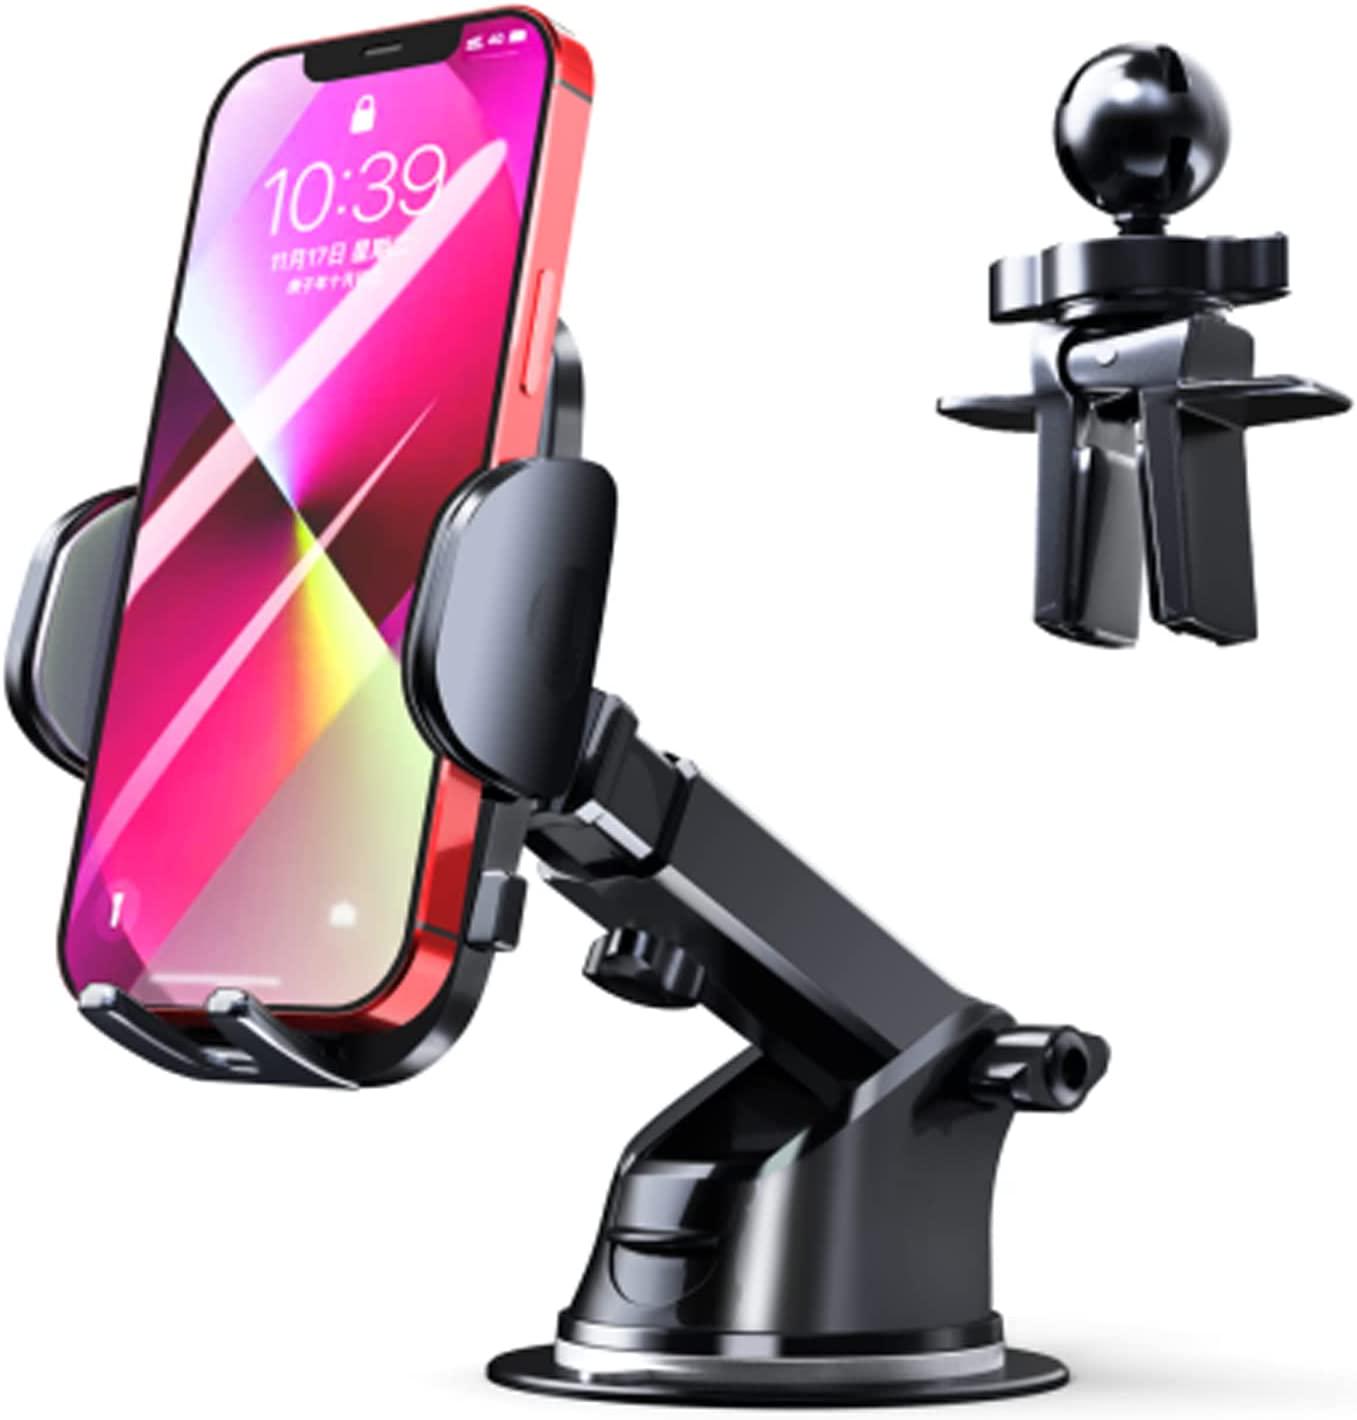 GIGIVOSHA, GIGIVOSHA Upgraded Car Cell Phone Holder - car Phone Holder Suitable for Dashboard Windshield Vents Long arm Strong Compatible with iPhone 13 Series/iPhone 12 series/11 / 1 Pro Max/XR/Samsung, etc.